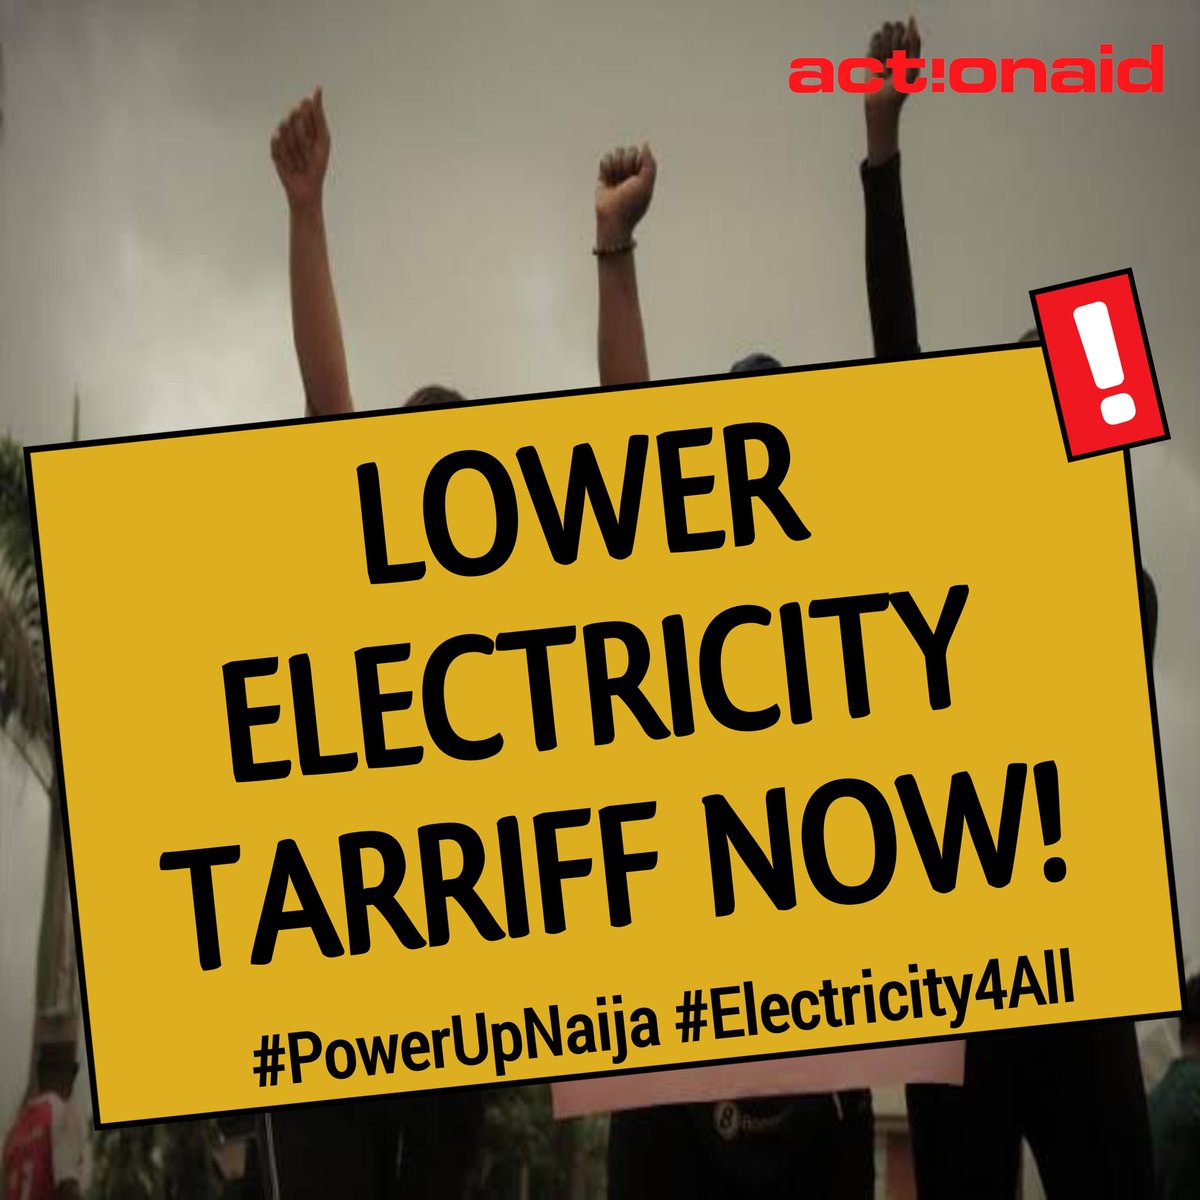 ⚡️Demanding Fair Power for All!⚡️ Say NO to High Tariffs! Join the movement for affordable and reliable electricity in Nigeria. Let's #PowerUpNaija #PowerUpNaijaNow #LabourDay #ElectricityForAll #Youth4GreenEco